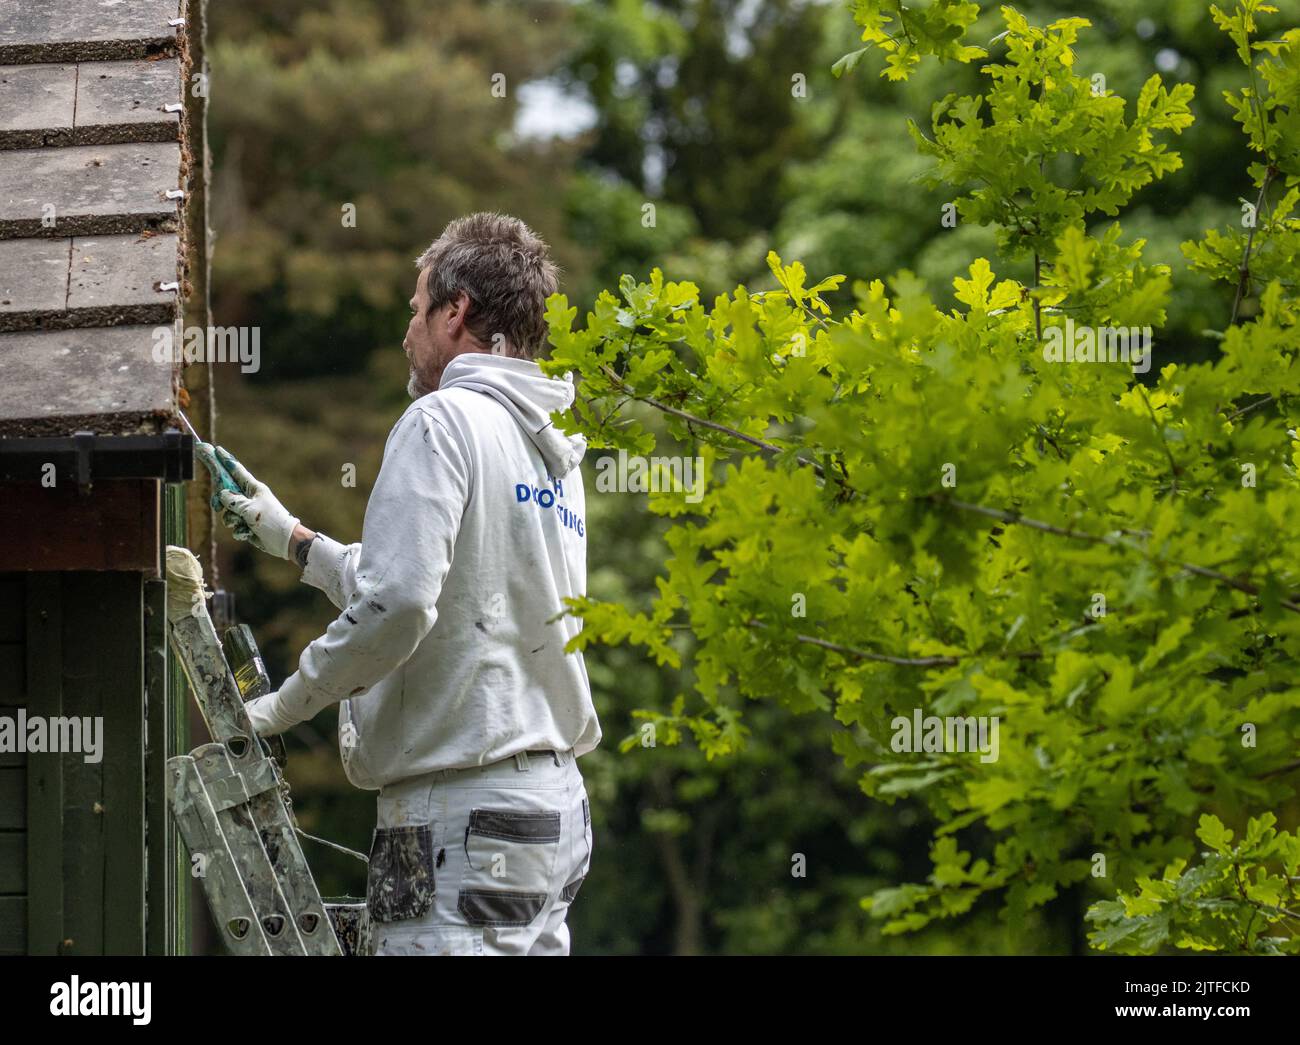 Painter and decorator working outside scraping paint from a wooden building. UK Stock Photo